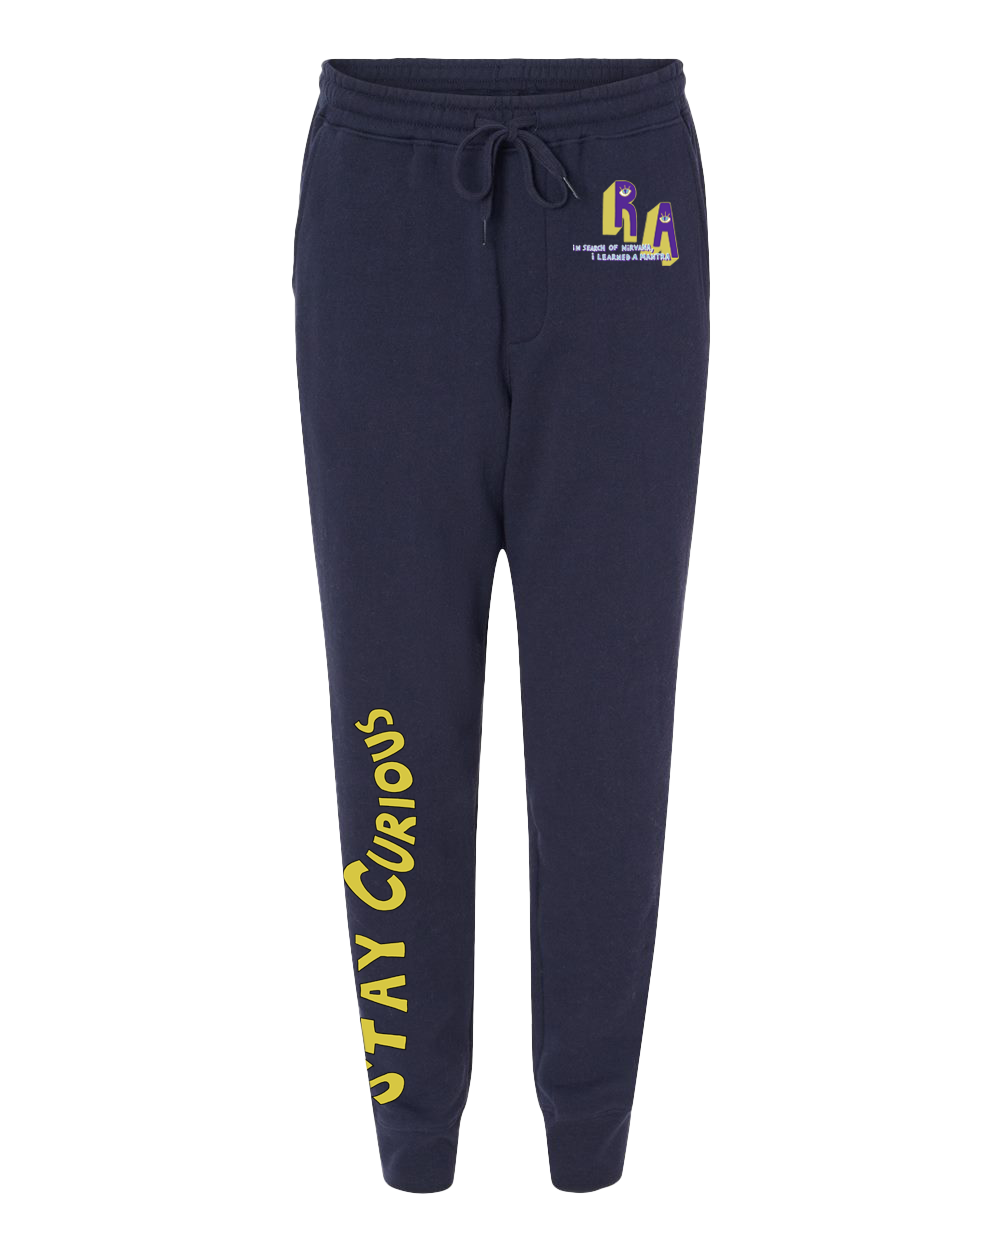 Stay Curious Tracksuit - Navy